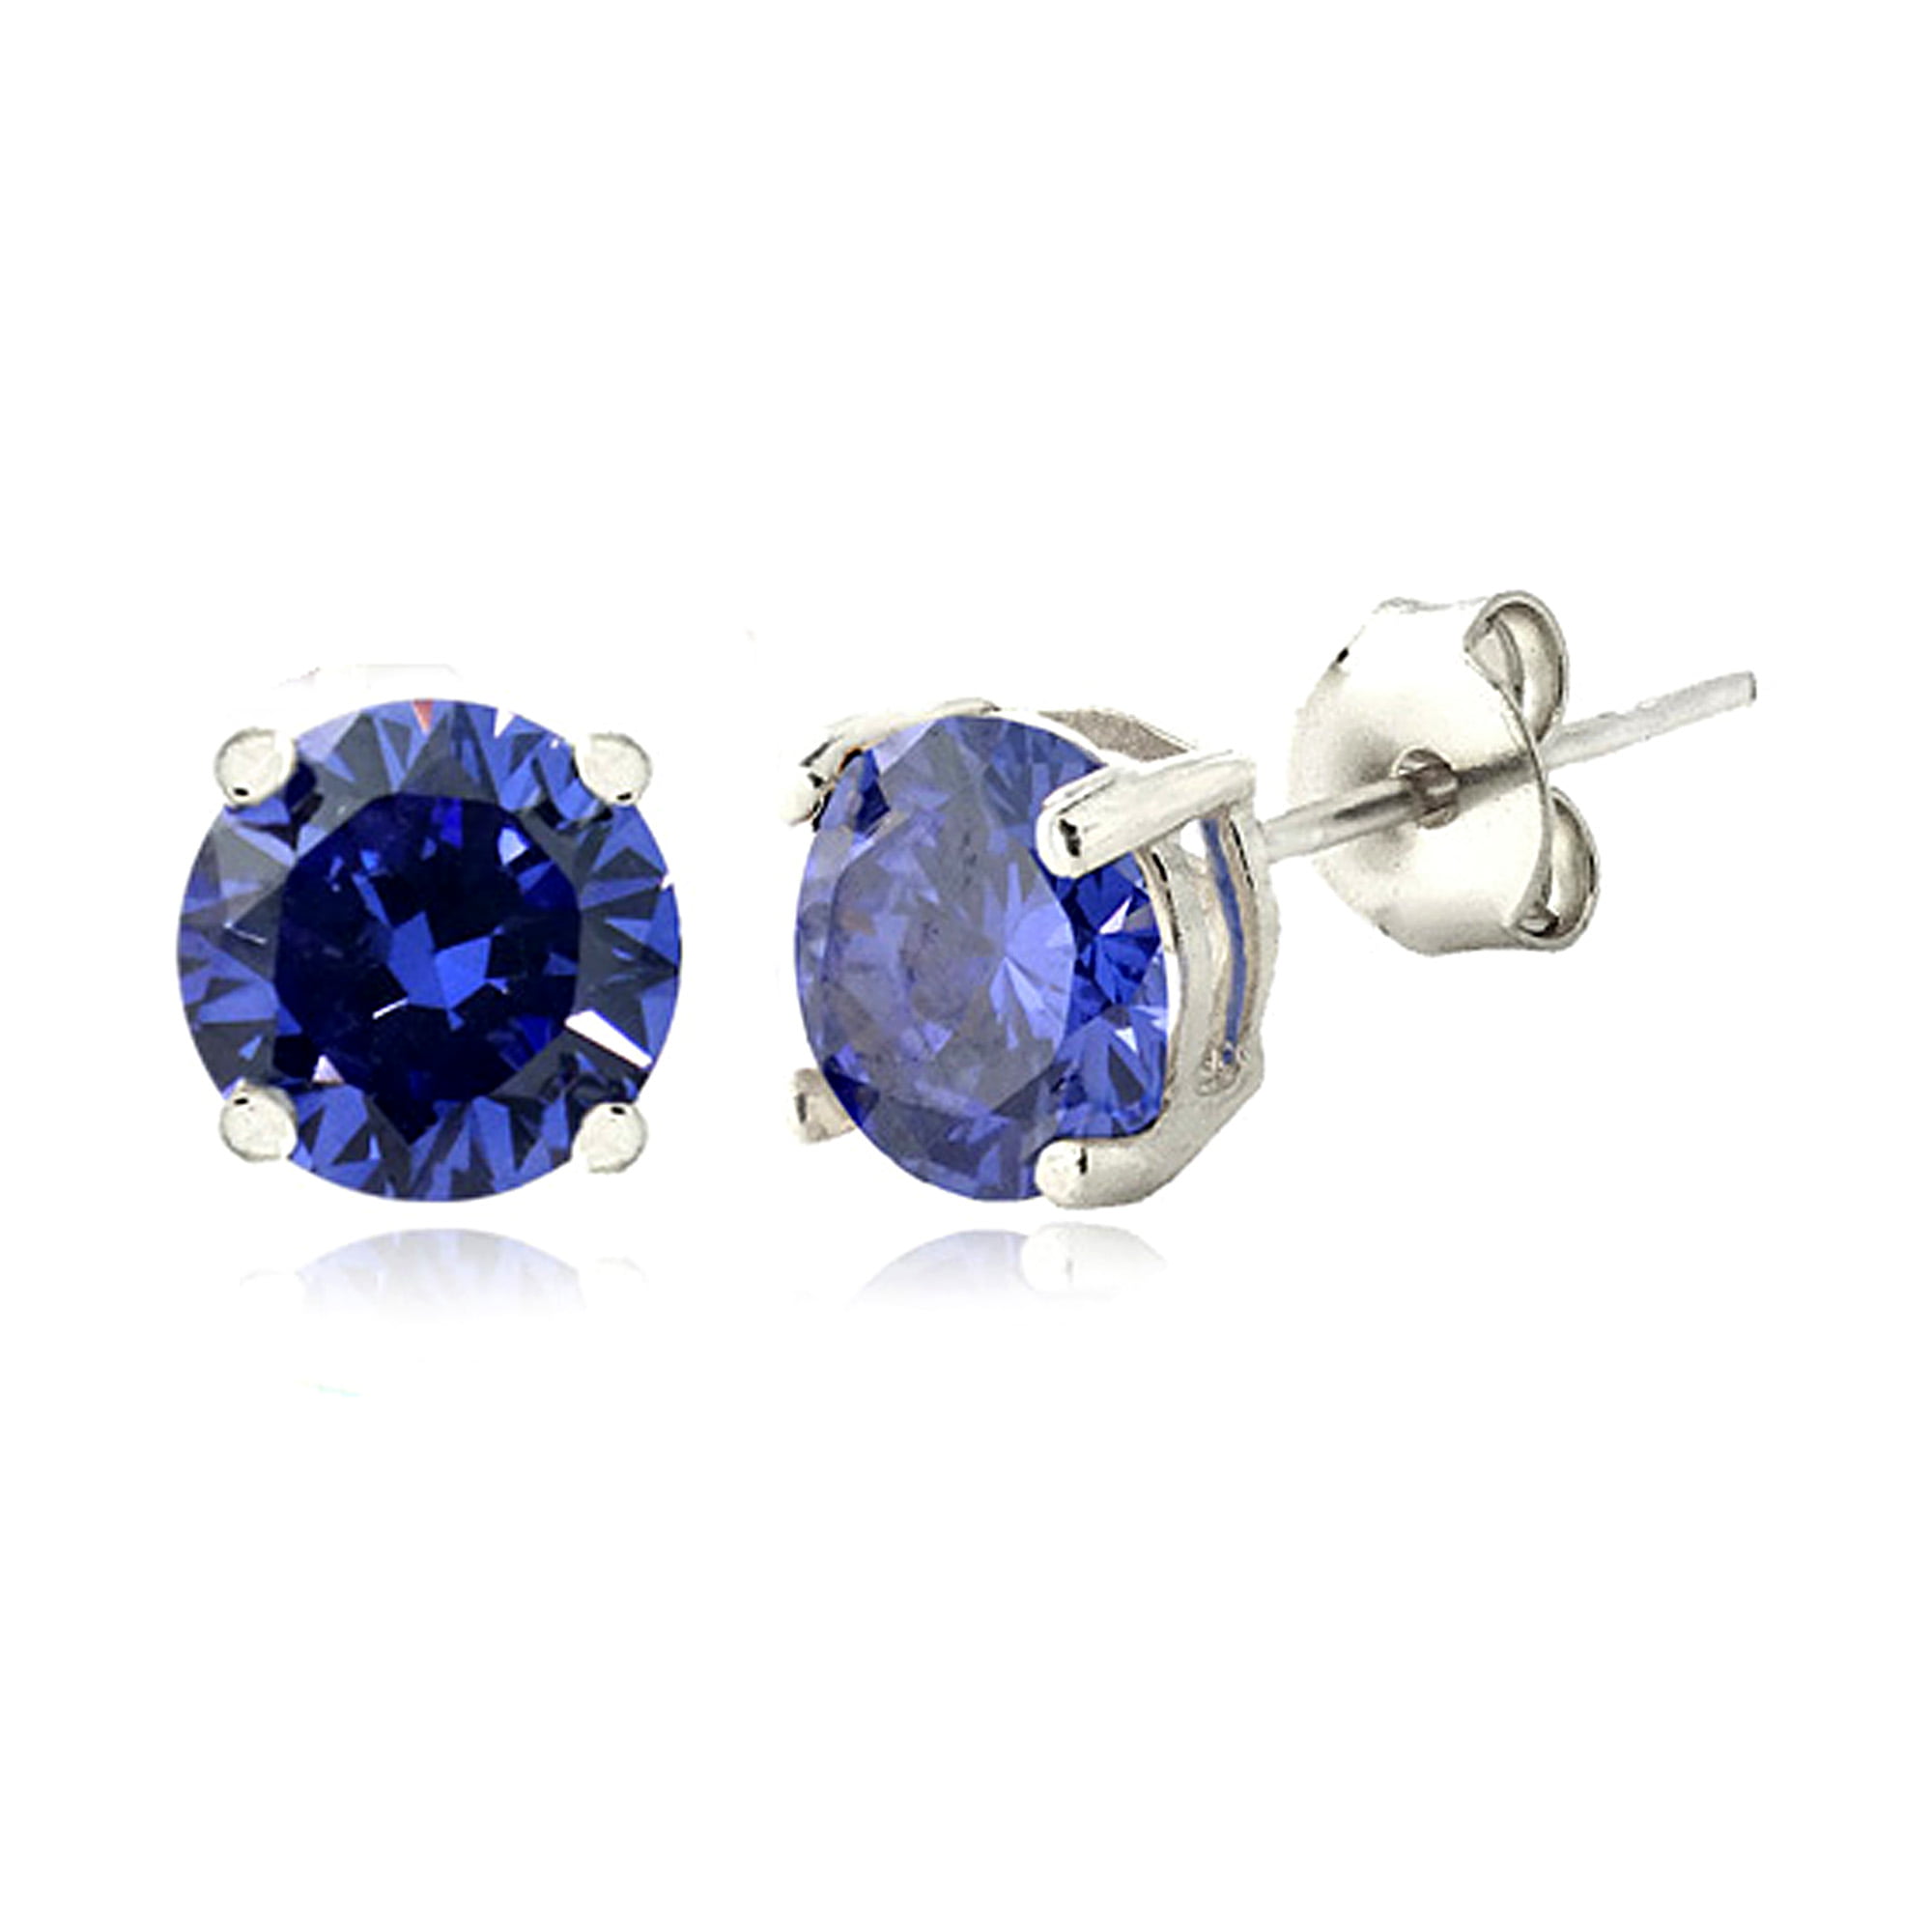 Silver Tone Simulated Tanzanite 6mm Round Solitaire Stud Earrings ...